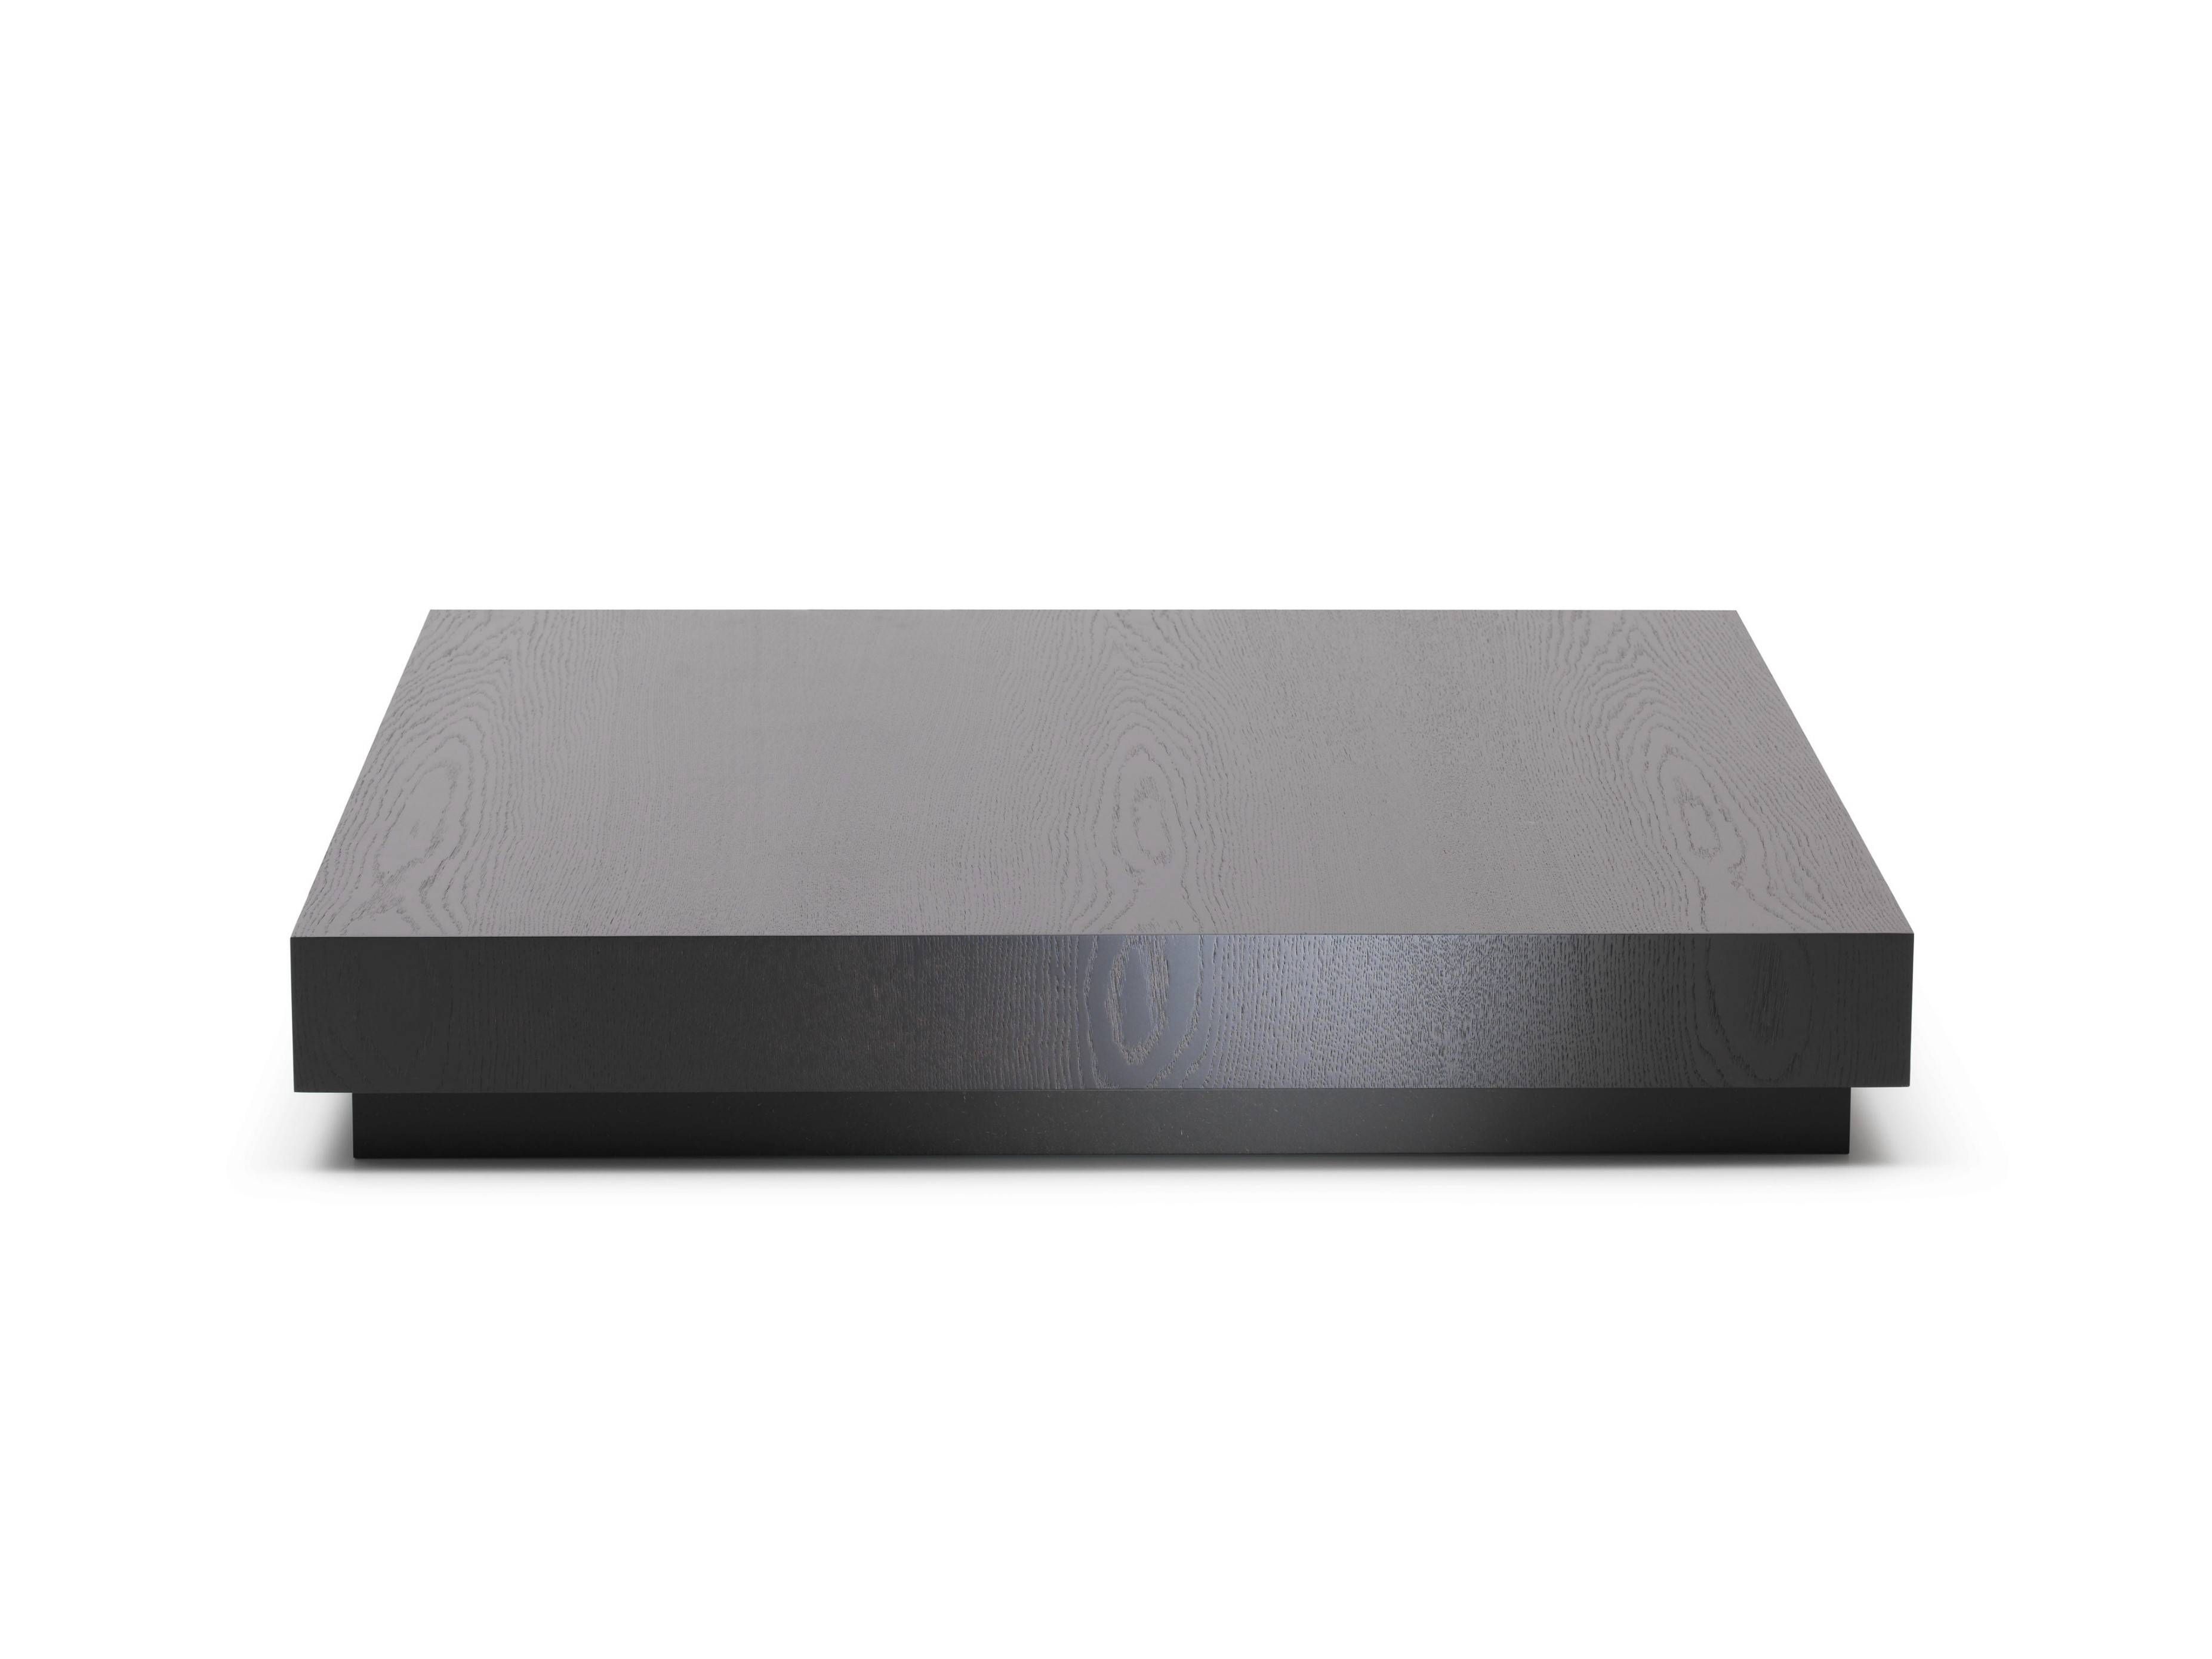 Coffee Table: Charming Minimalist Coffee Table Inspirations Pertaining To Square Stone Coffee Tables (View 28 of 30)